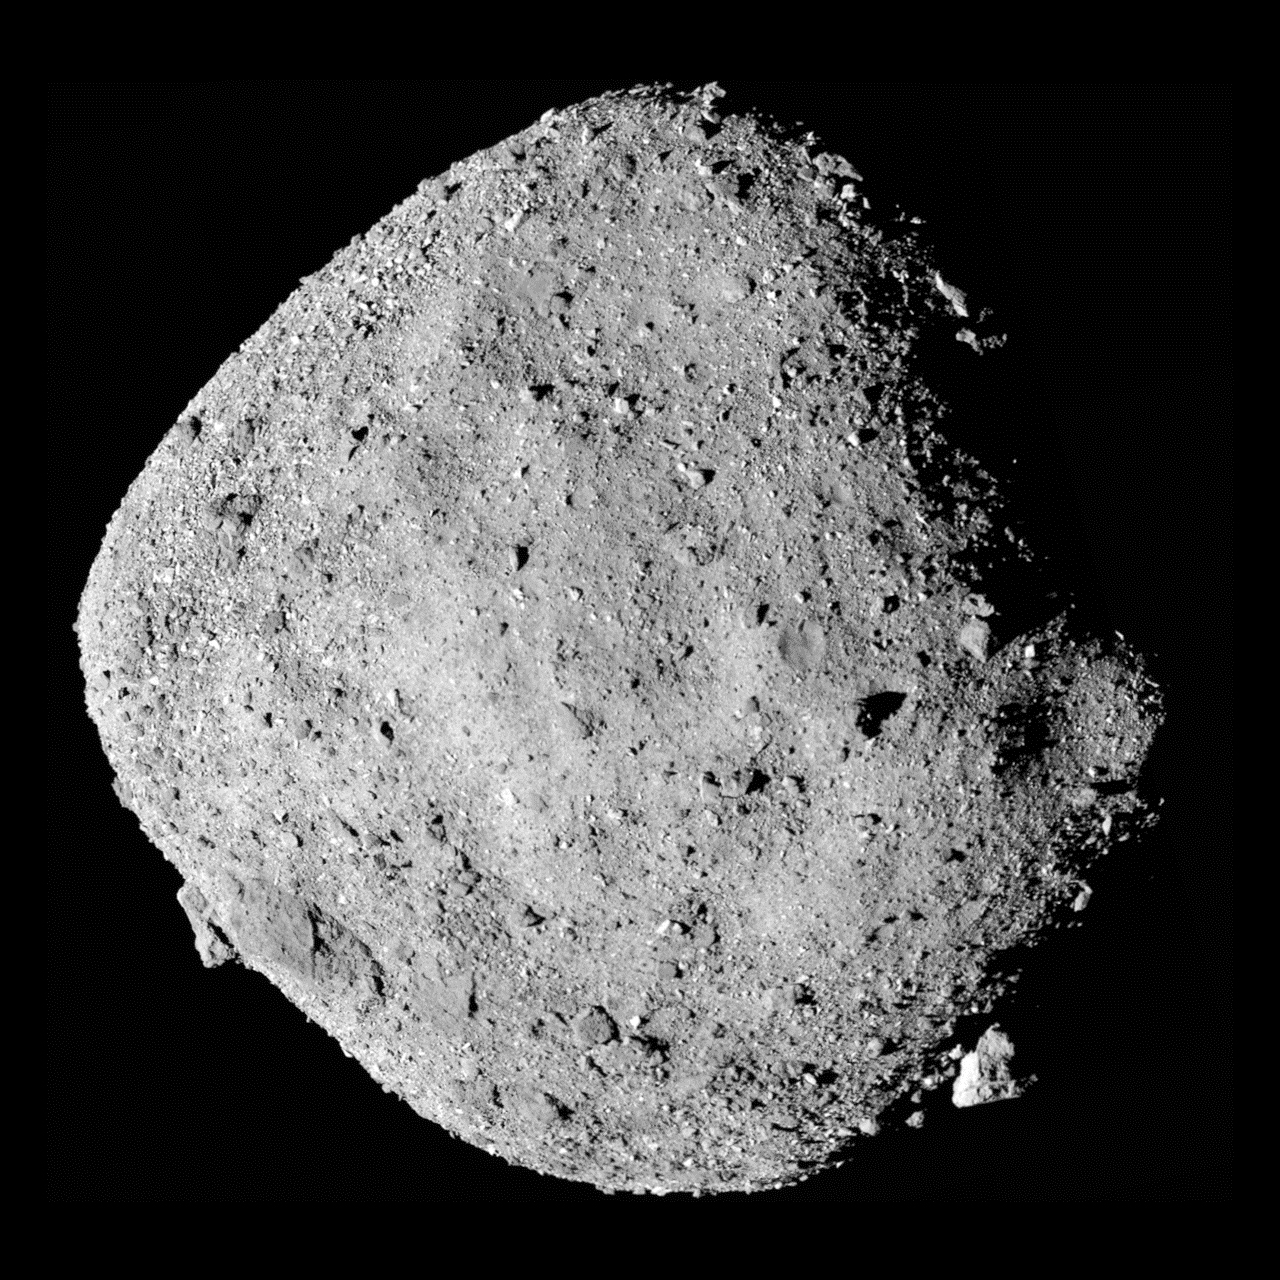 This mosaic image of asteroid Bennu is composed of 12 images collected on Dec. 2, 2018 by the OSIRIS-REx spacecraft from a range of 15 miles (24 km).